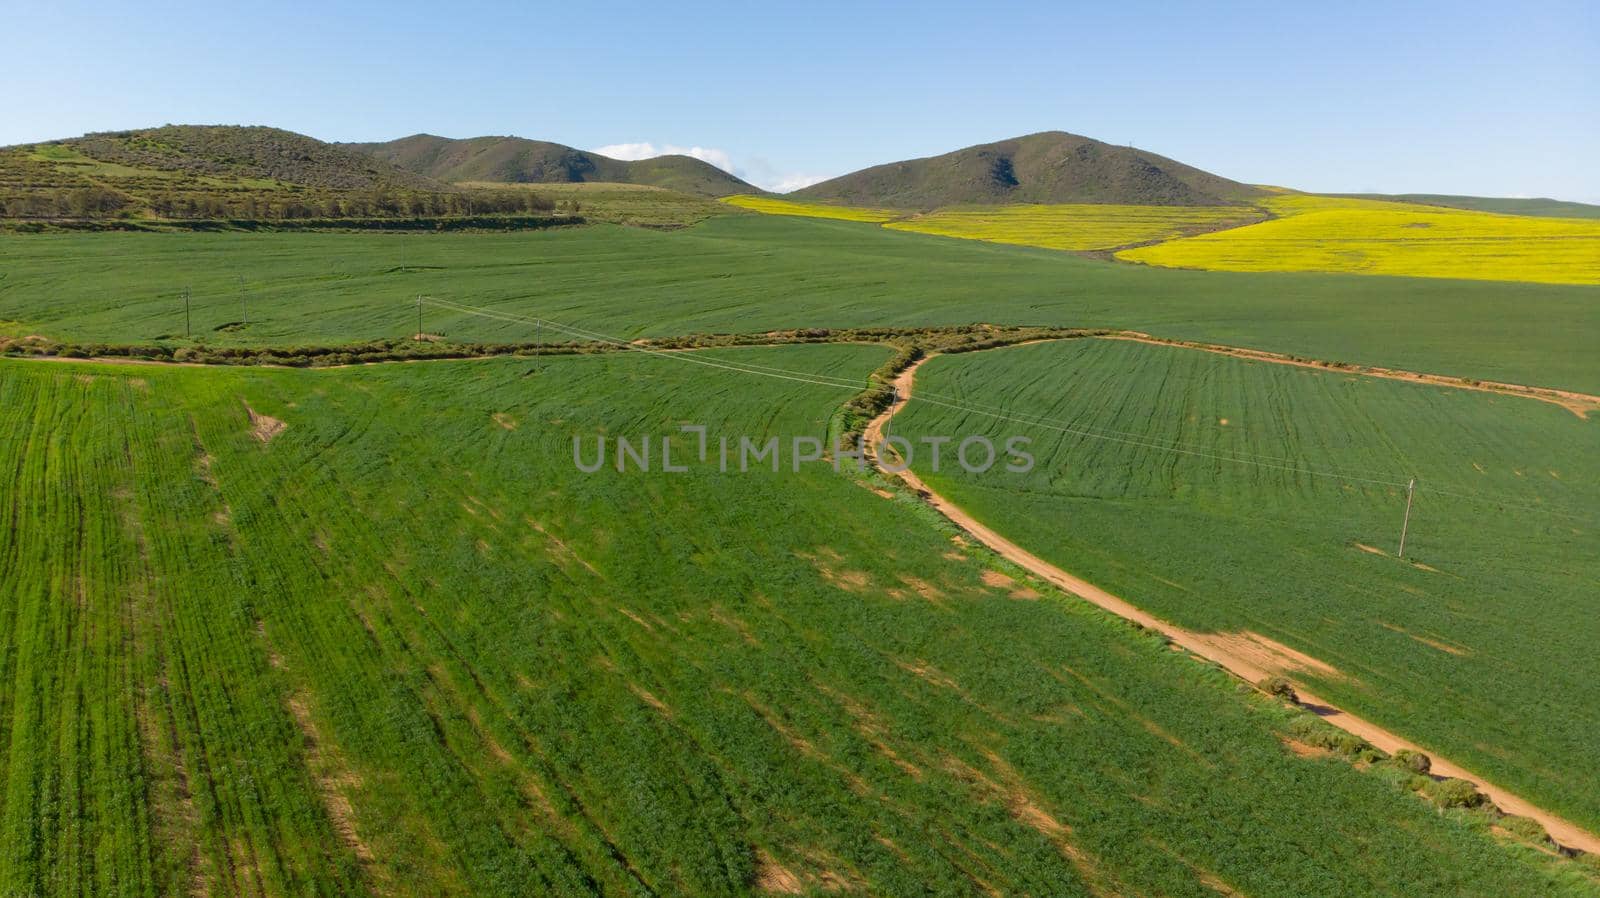 General view of countryside landscape with cloudless sky. environment, sustainability, ecology, renewable energy, global warming and climate change awareness.